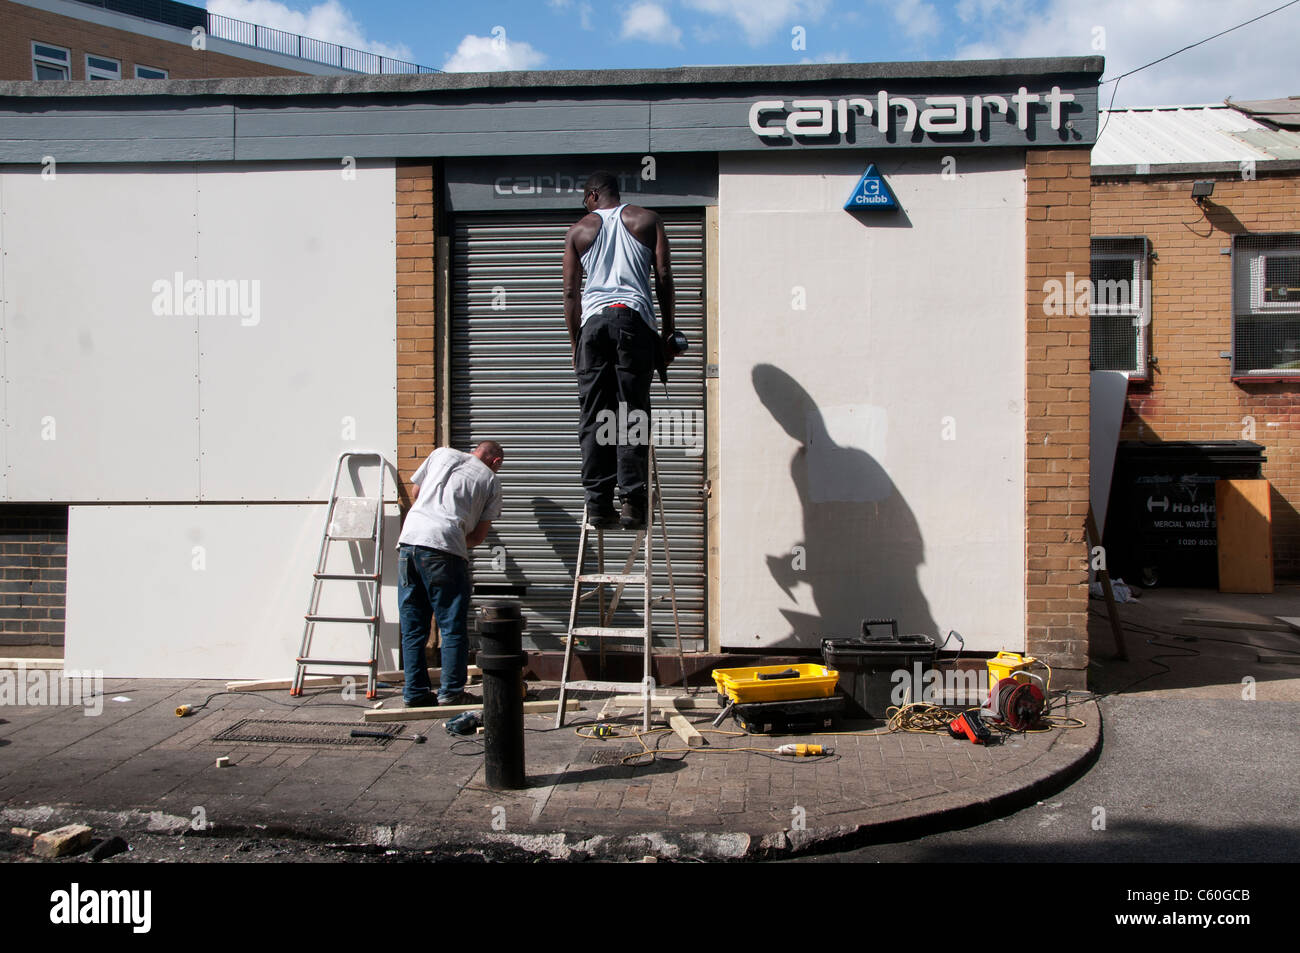 Hackney after the riot. Boarding up Carhartt warehouse after it was looted. Stock Photo